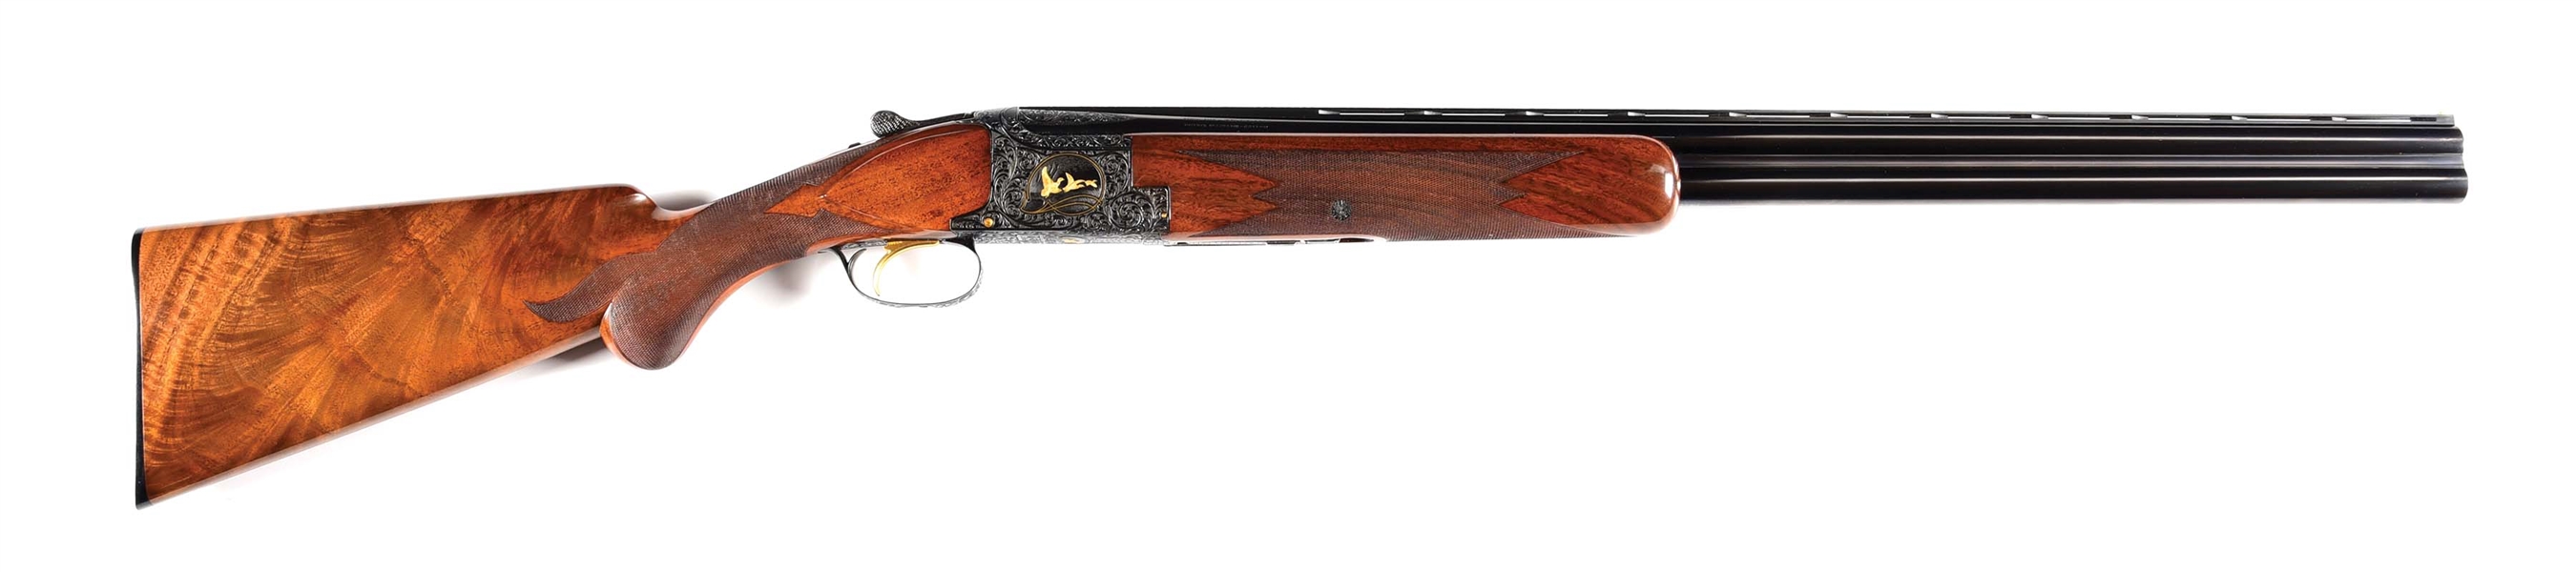 (C) MIDAS GRADE BROWNING SUPERPOSED SHOTGUN ENGRAVED BY LEROY WITH BOX.